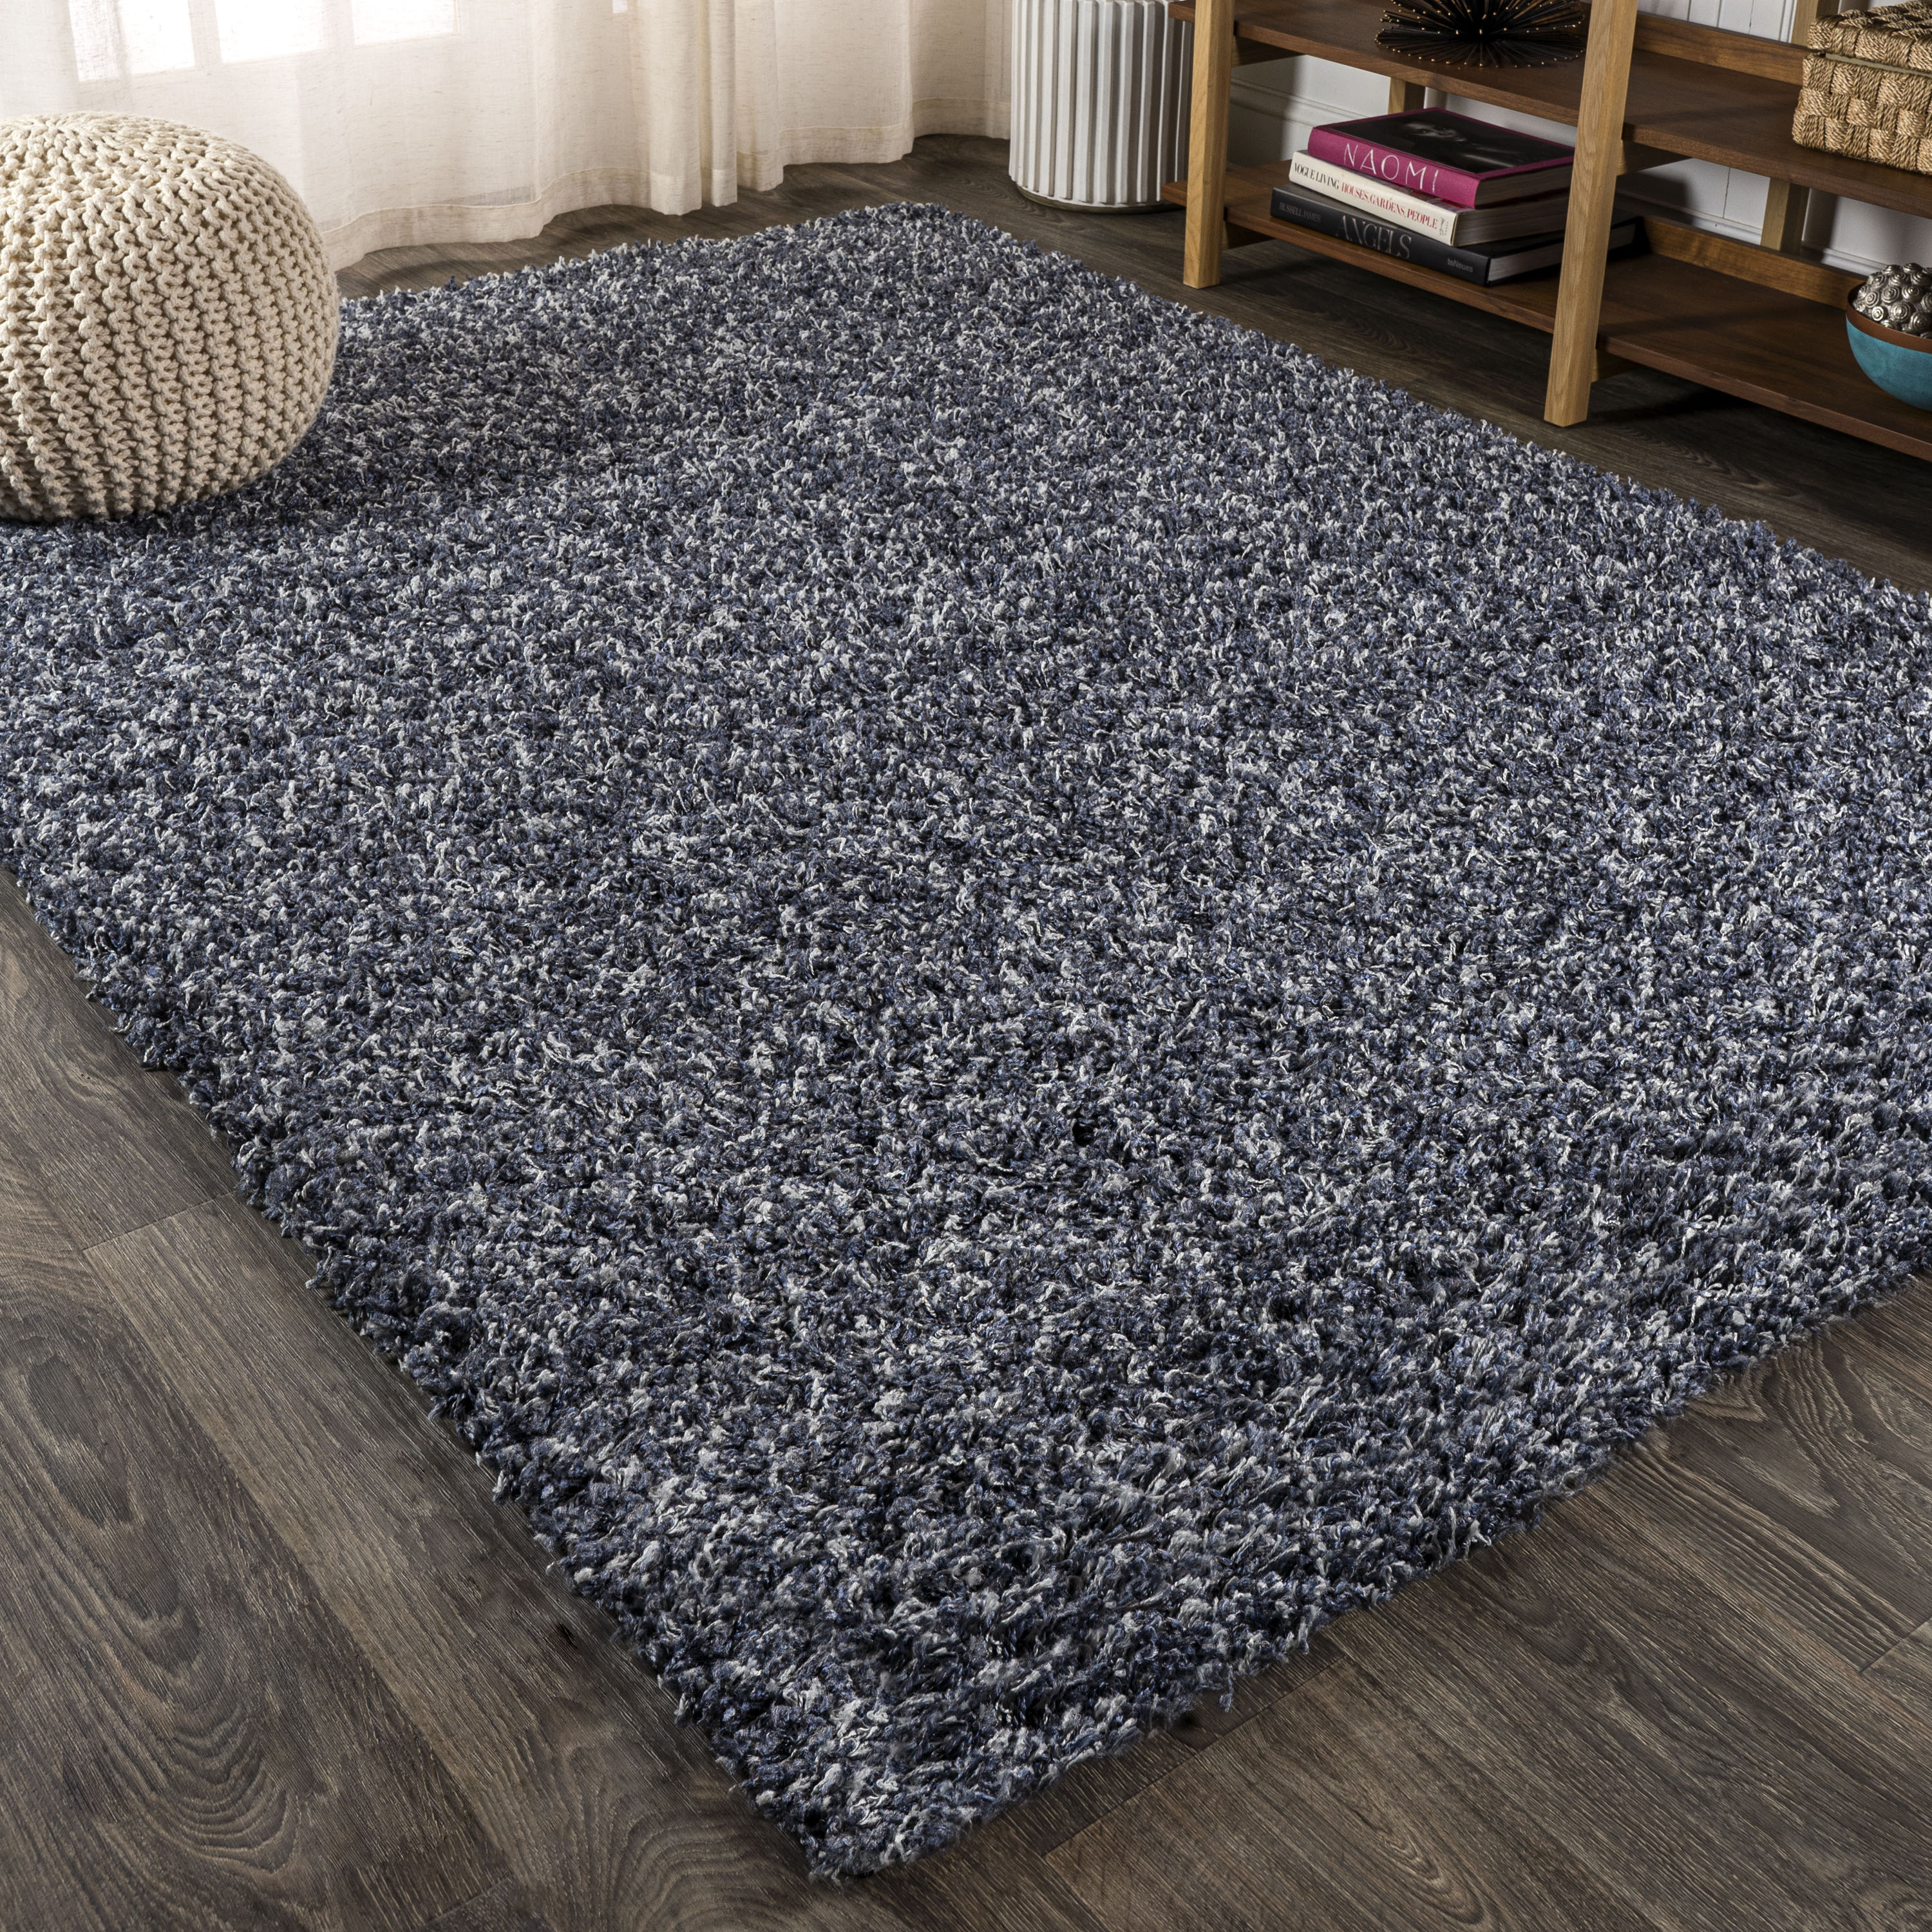 Rugs Taupe Beige-Brown Contemporary Area Shag Rug Solid Modern Shaggy Carpet 